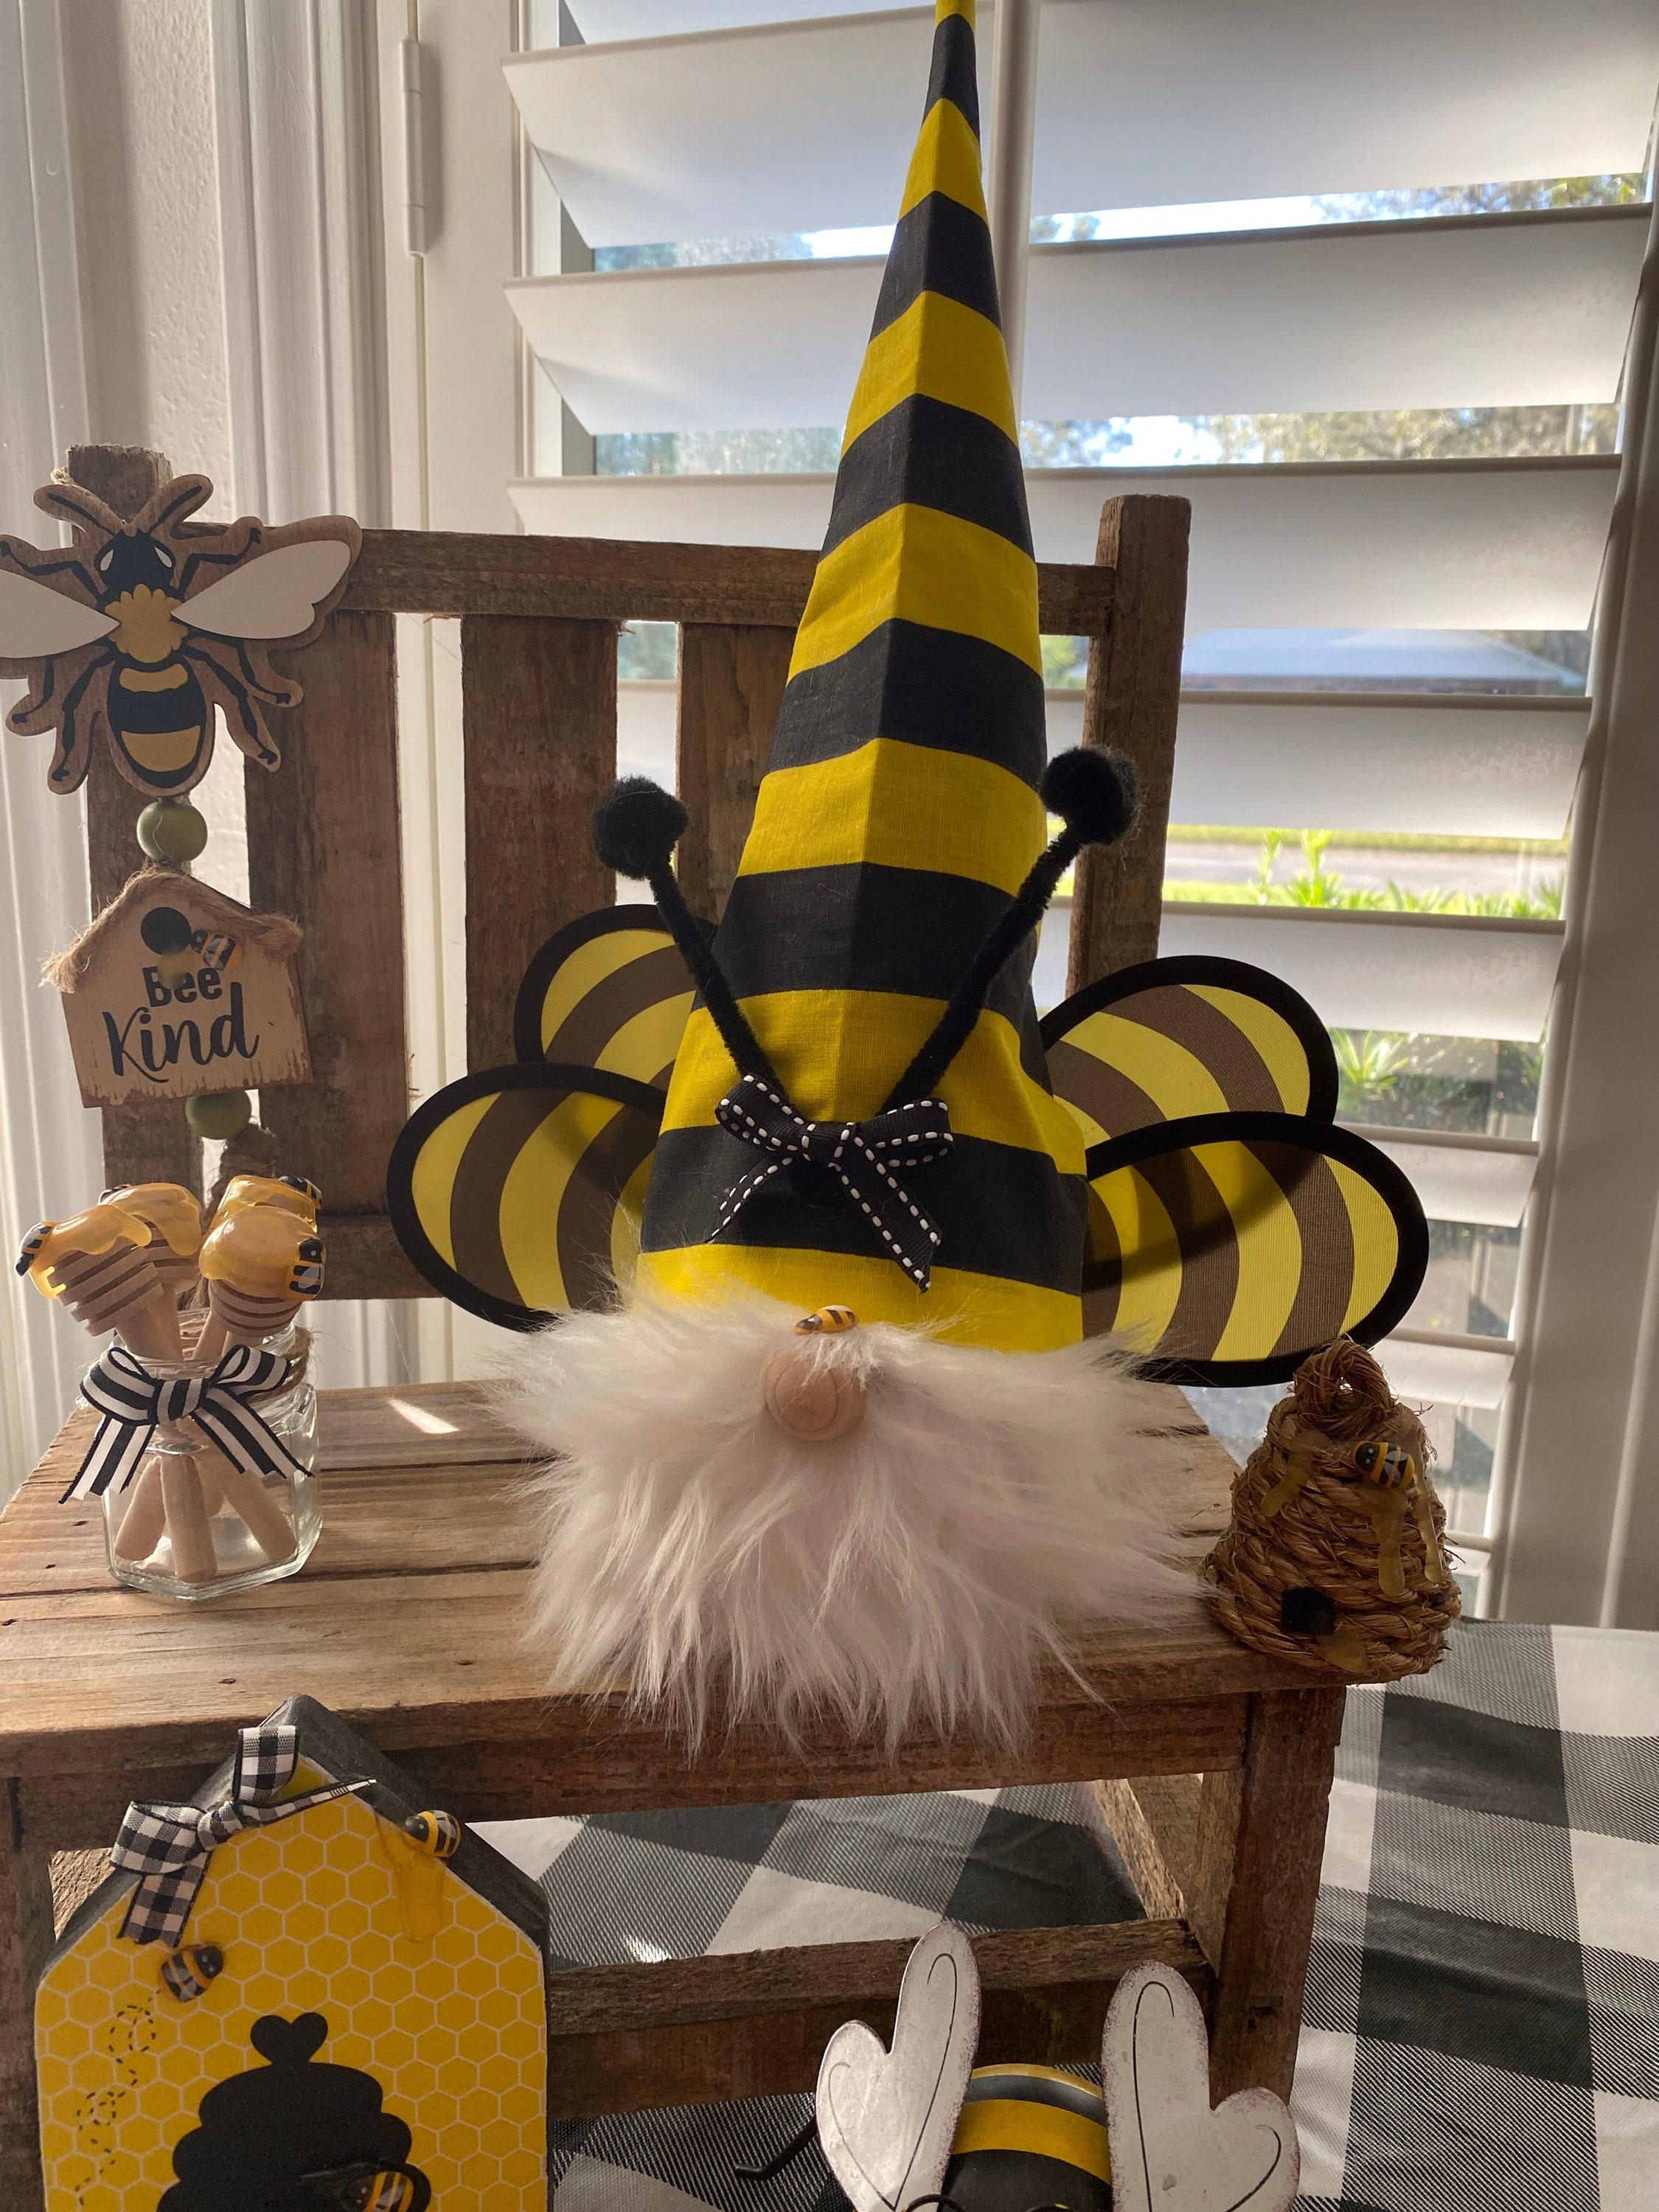 Bumble Bee Garden Gnome, Bumble Bees Decorations